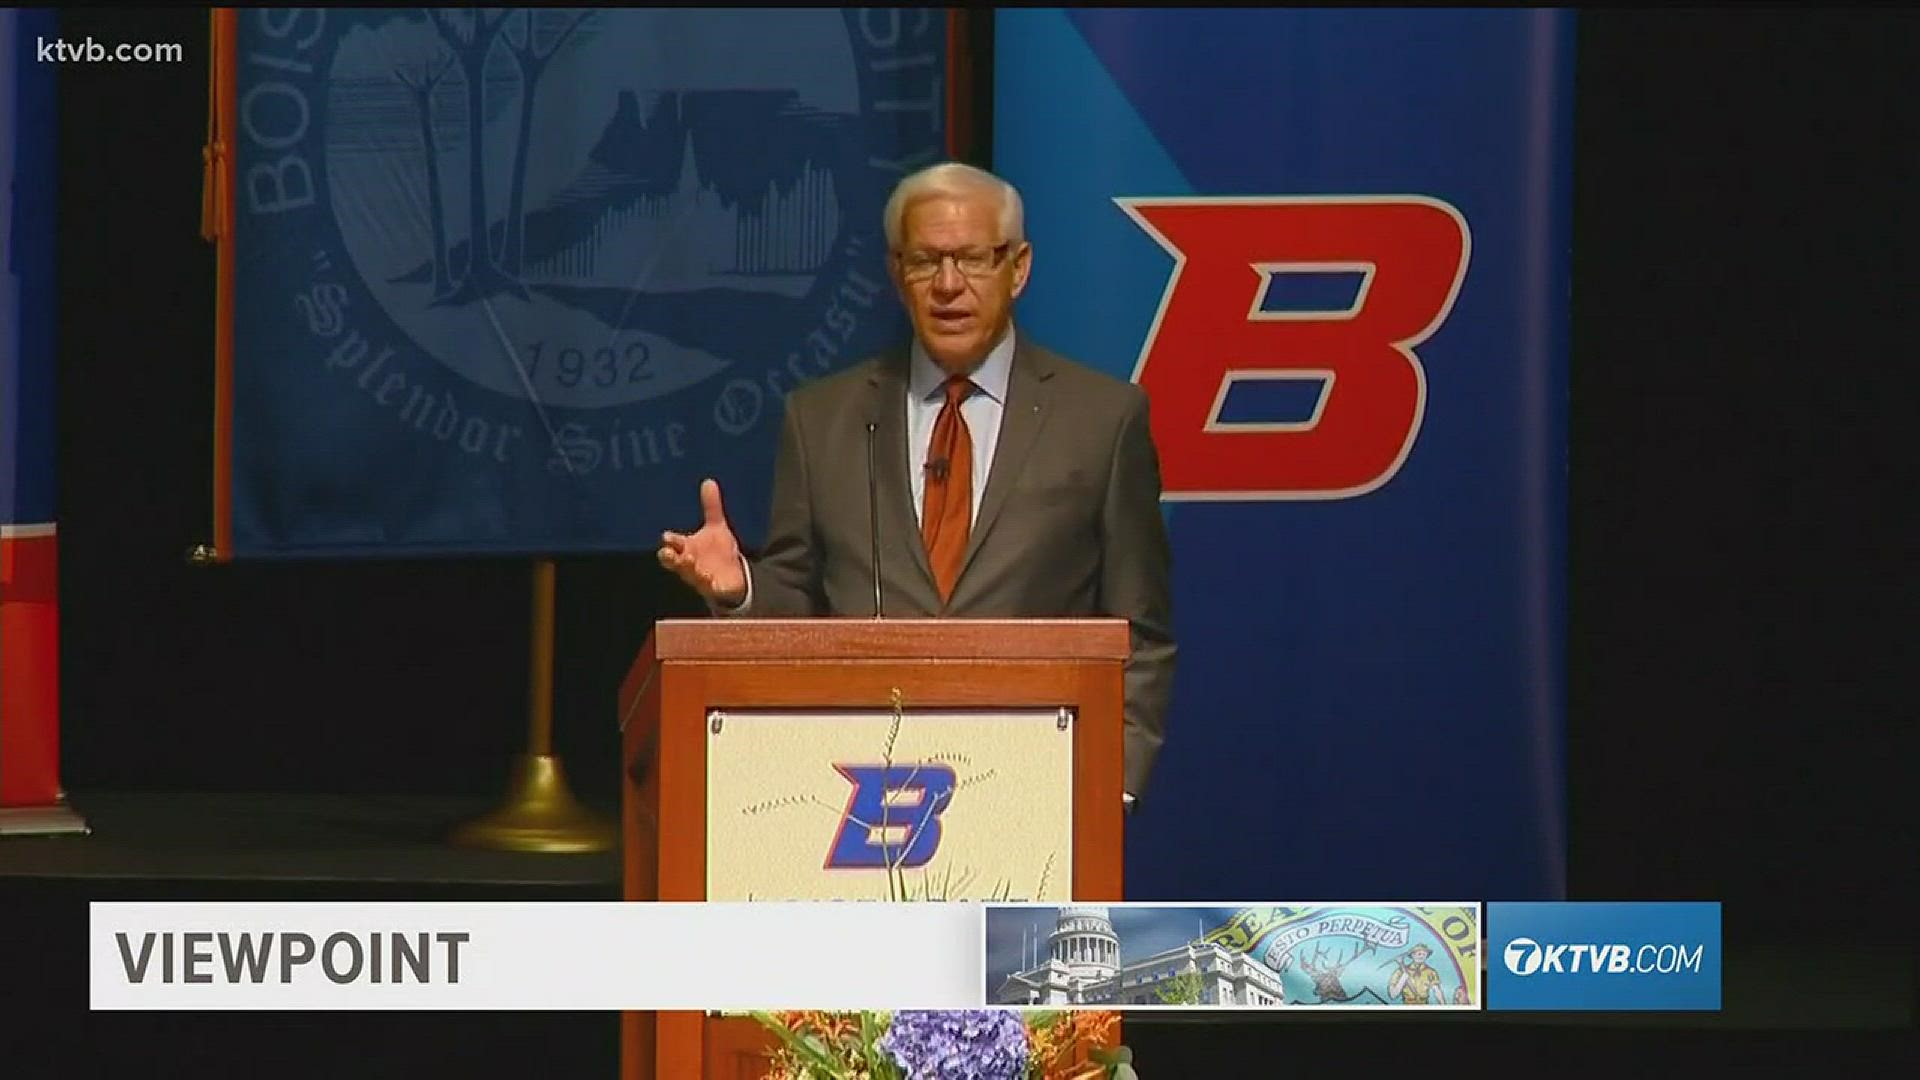 We talk to retiring Boise State University President Dr. Bob Kustra about the incredible growth on campus over his 15 years, the academic and athletic accomplishments, a couple of his controversial decisions and what's next for him.